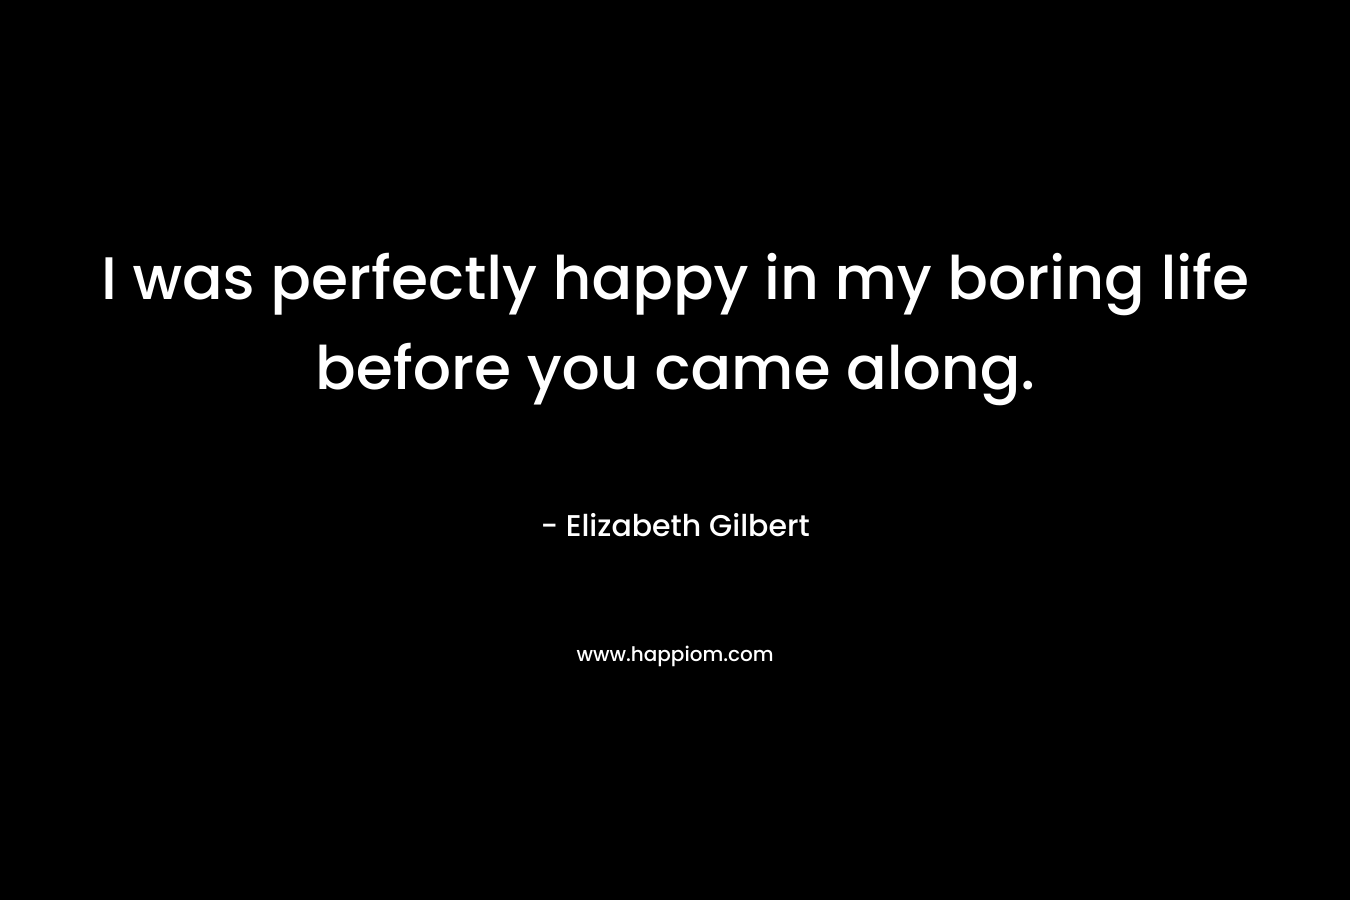 I was perfectly happy in my boring life before you came along. – Elizabeth Gilbert